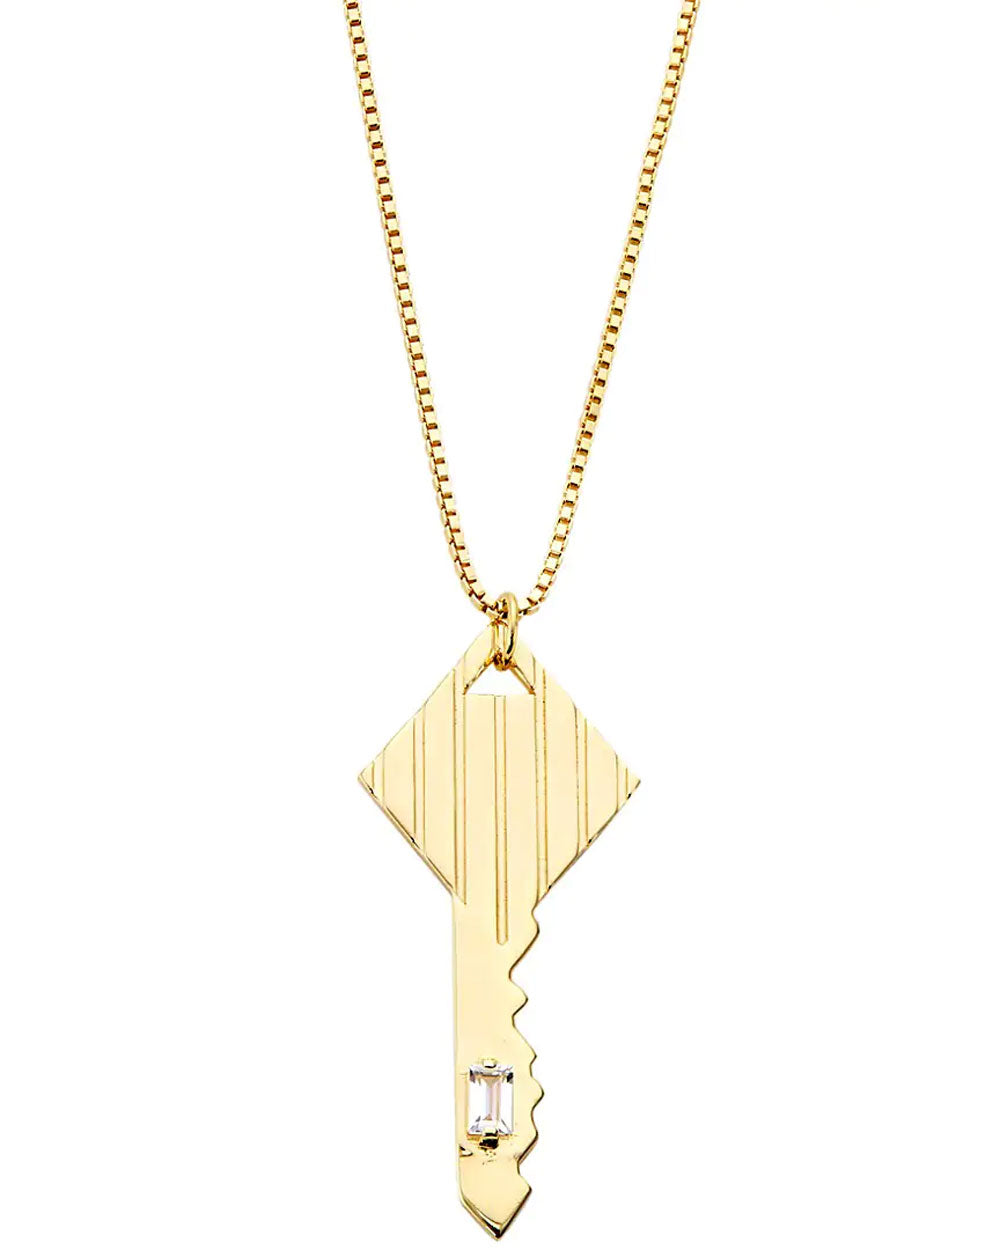 14k Yellow Gold Plated Silver Kaida Key on Chain Necklace